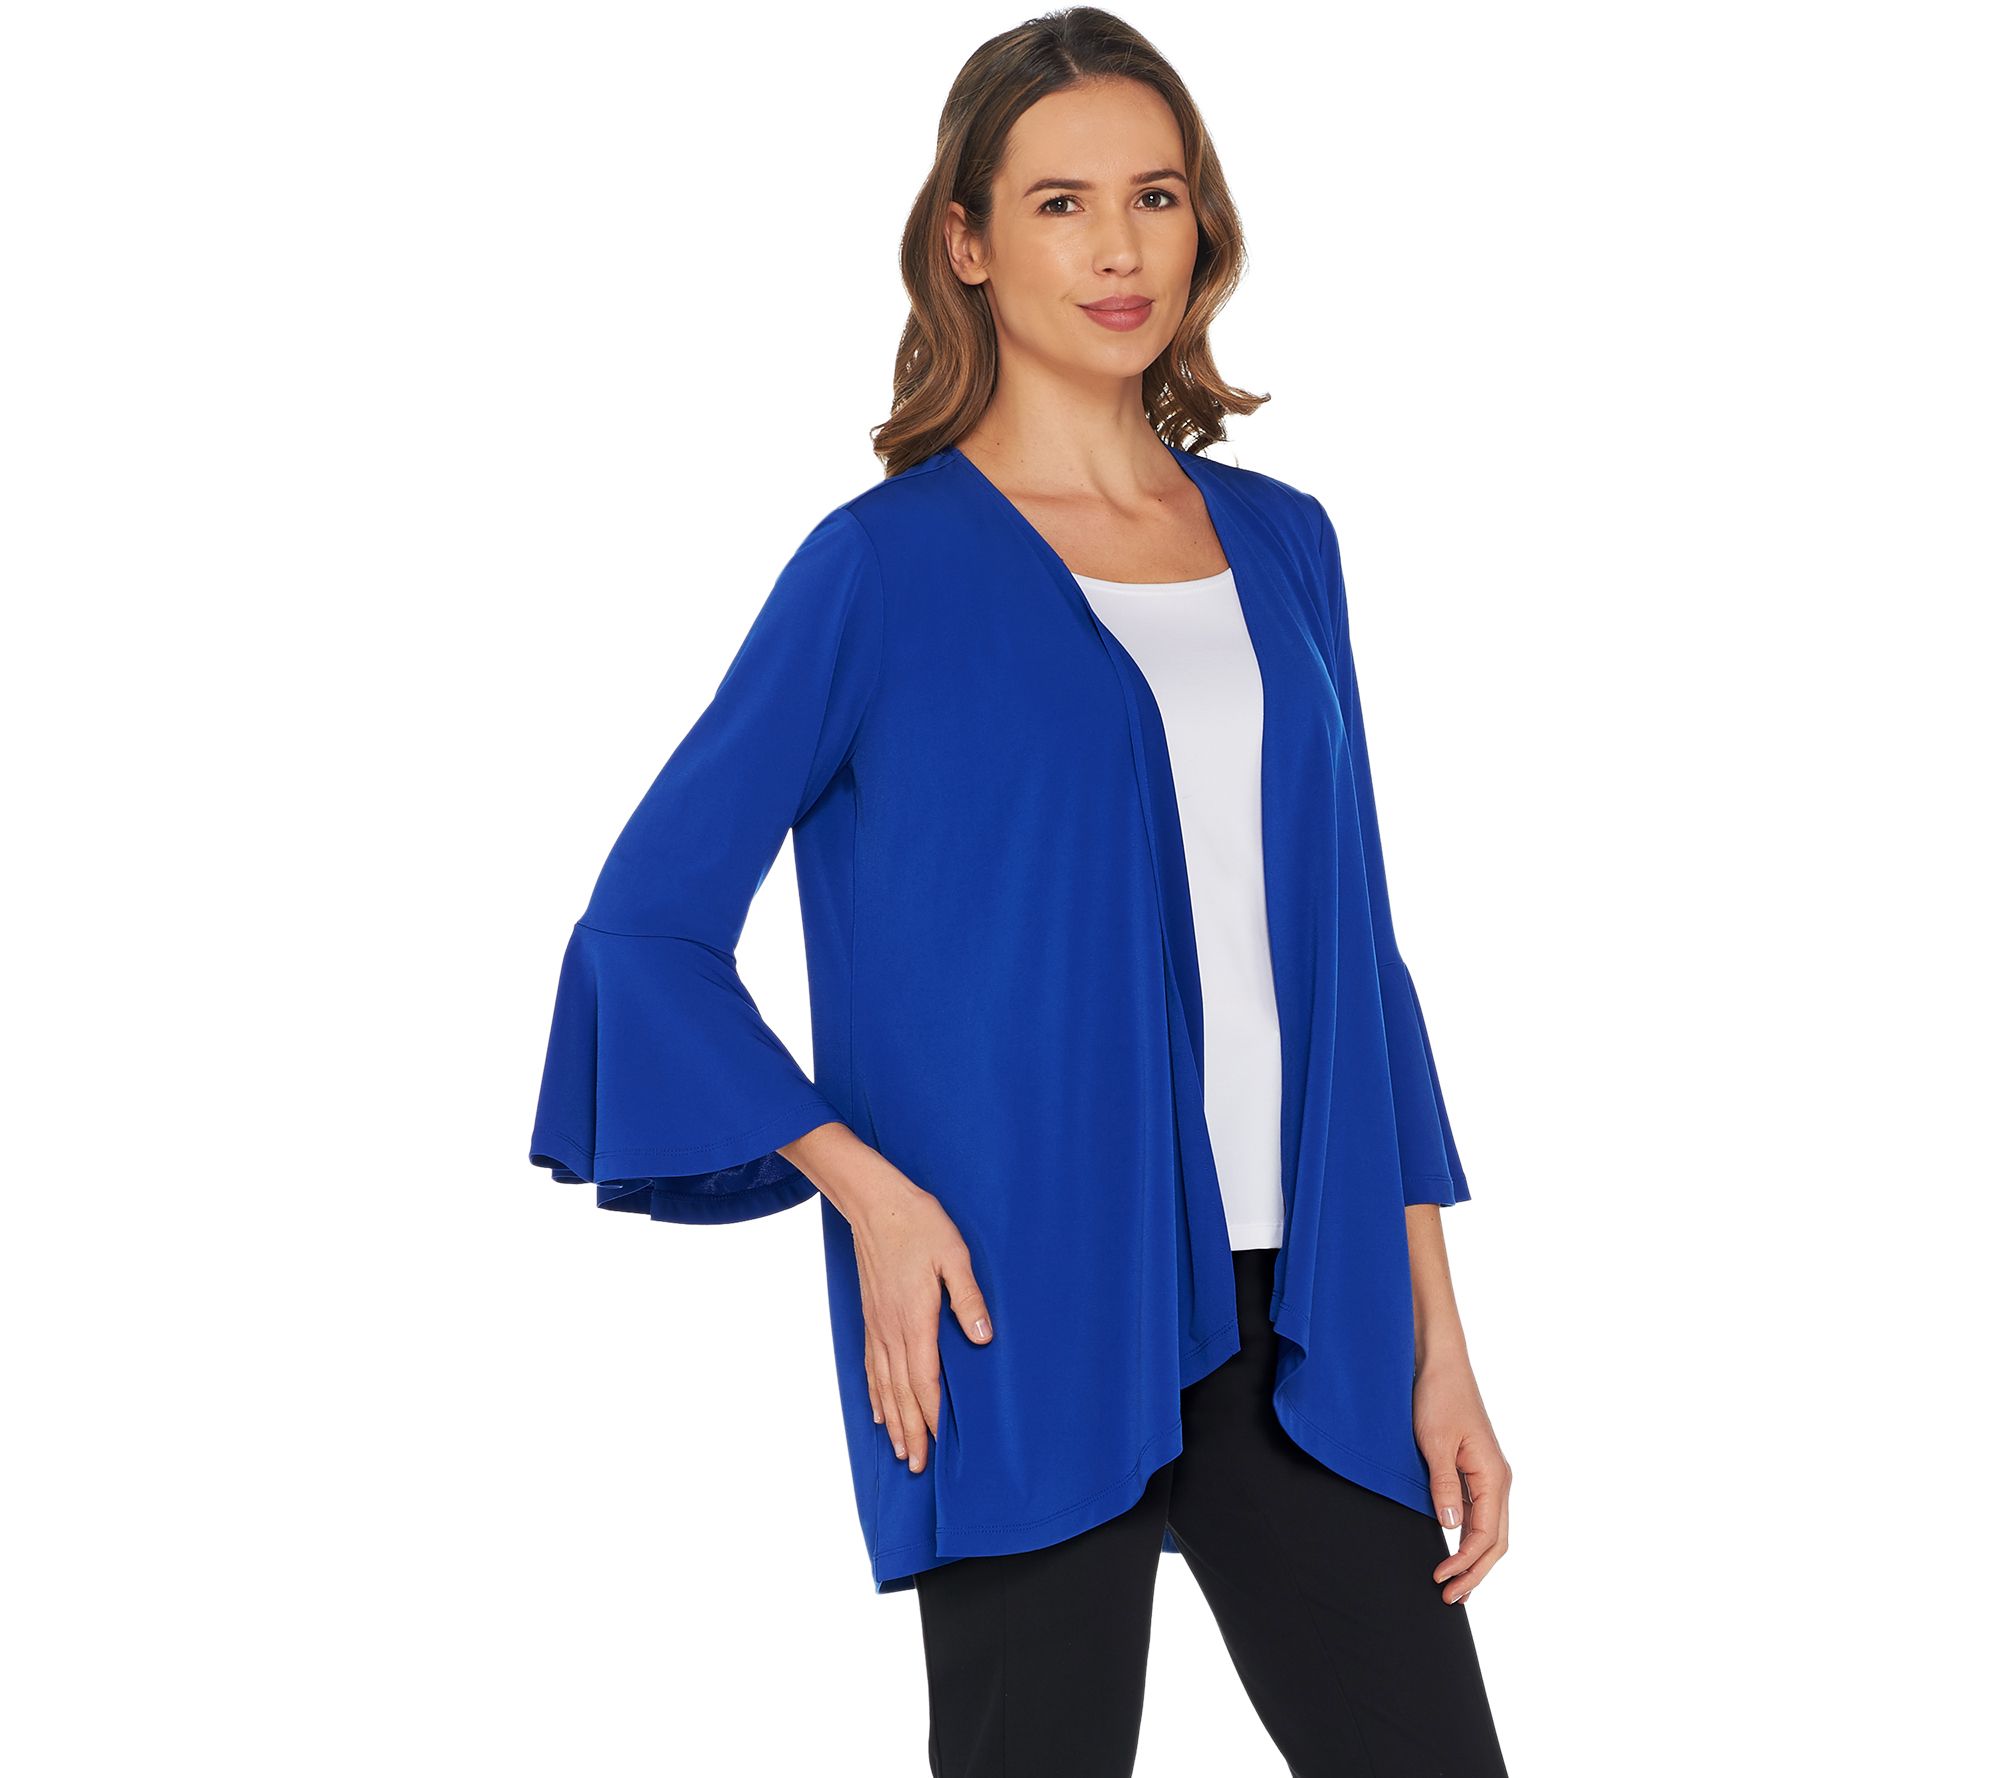 Every Day by Susan Graver Liquid Knit Cardigan with Bell Sleeves - QVC.com